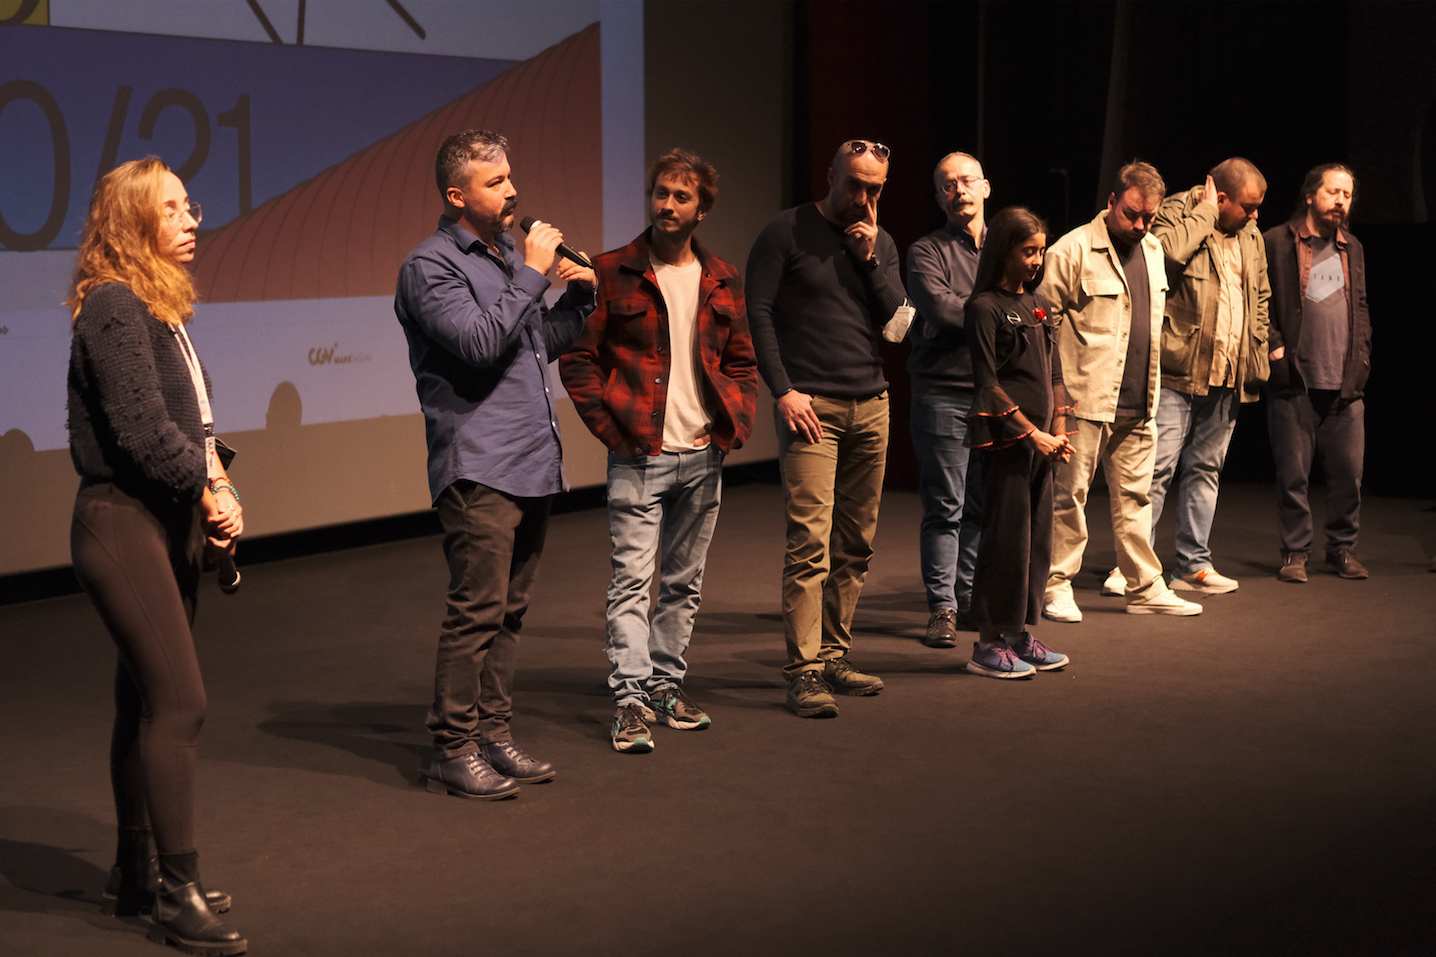 Q&A Session With The Film Crew Of “The Hero In Me” Was Held After The Screening At The 9th Bosphorus Film Festival